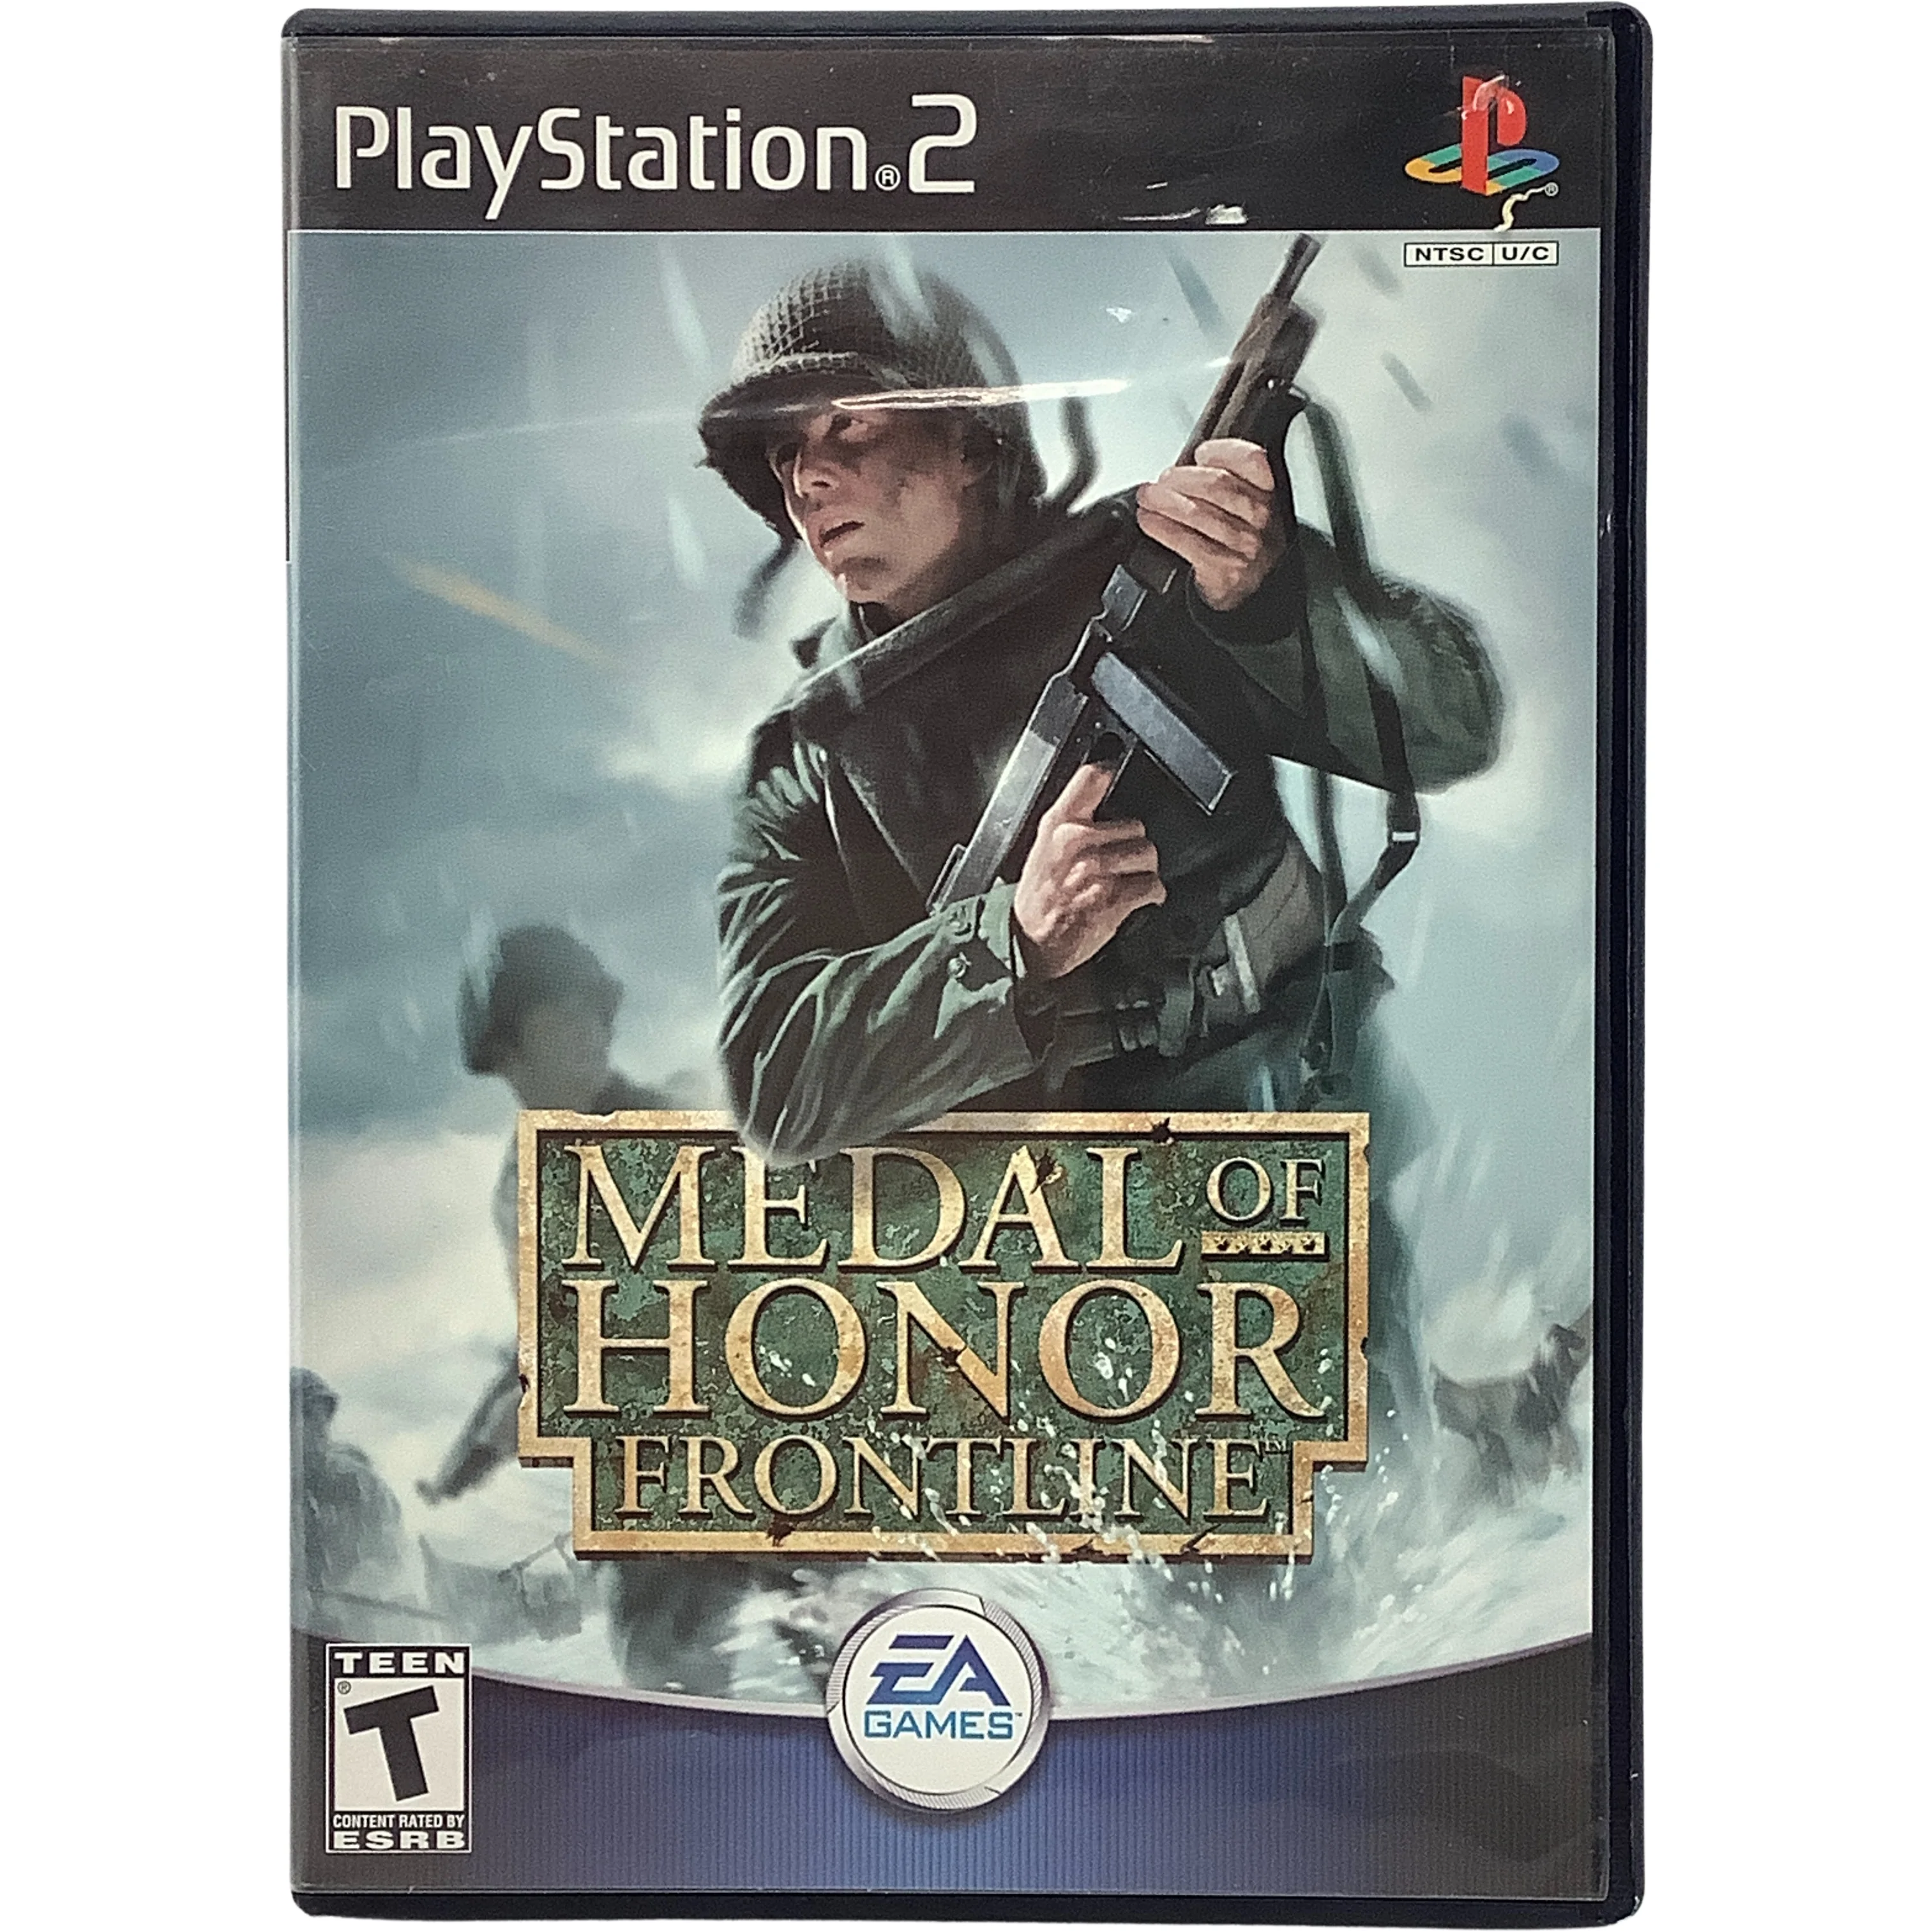 PlayStation 2 / "Medal of Honor: Frontline" Game / Video Game **OPENED**